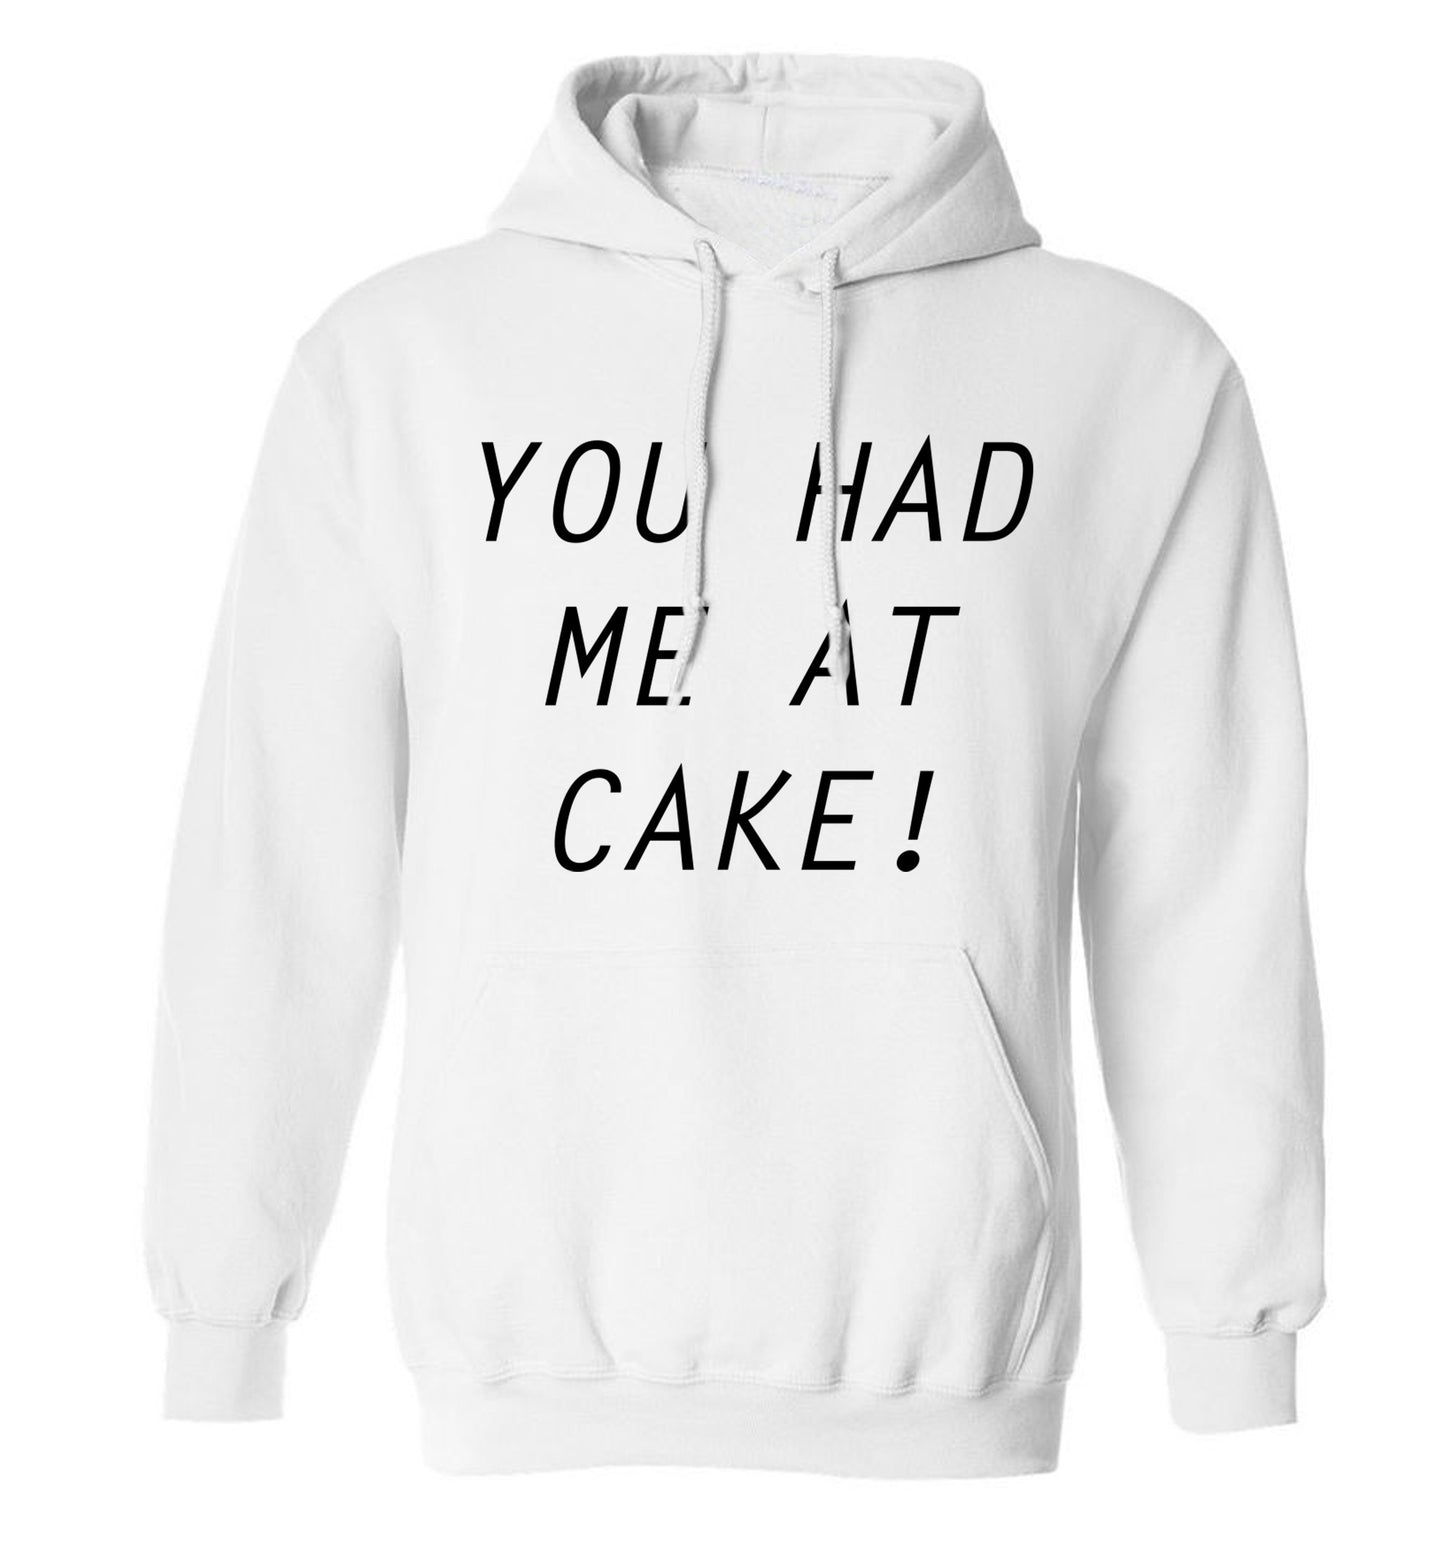 You had me at cake adults unisex white hoodie 2XL